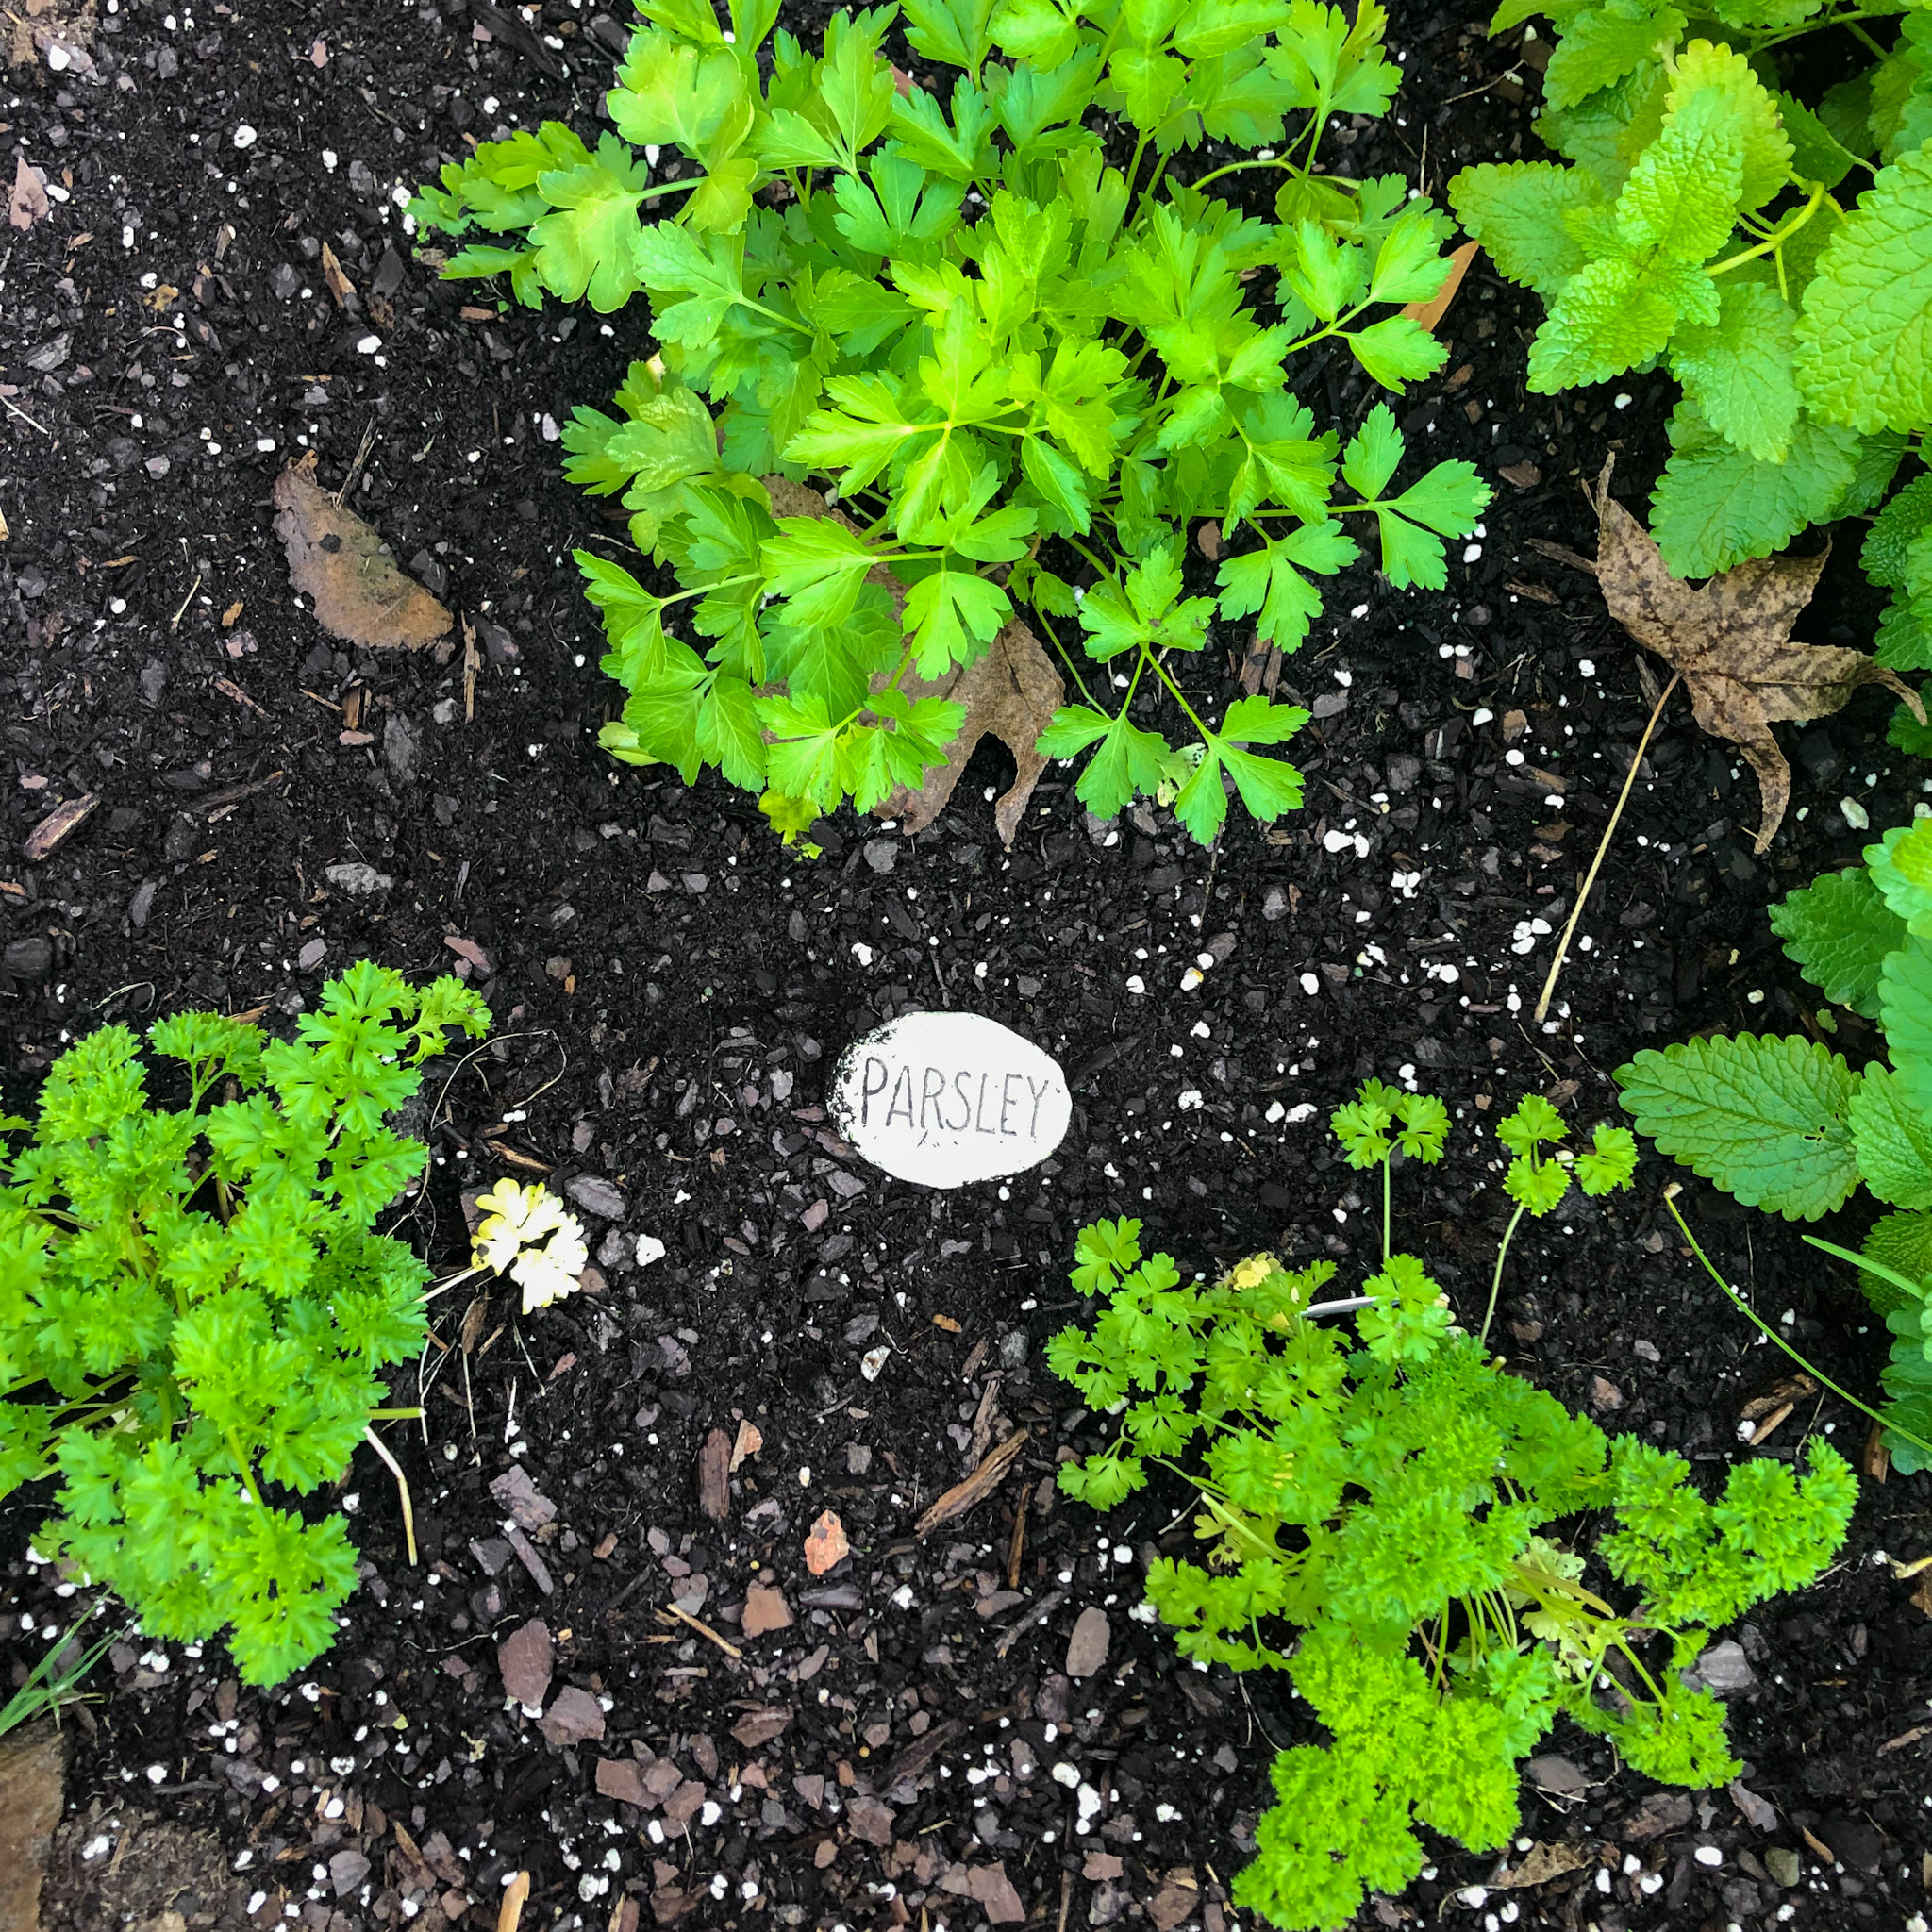 Top down of parsley plants in a raised garden bed